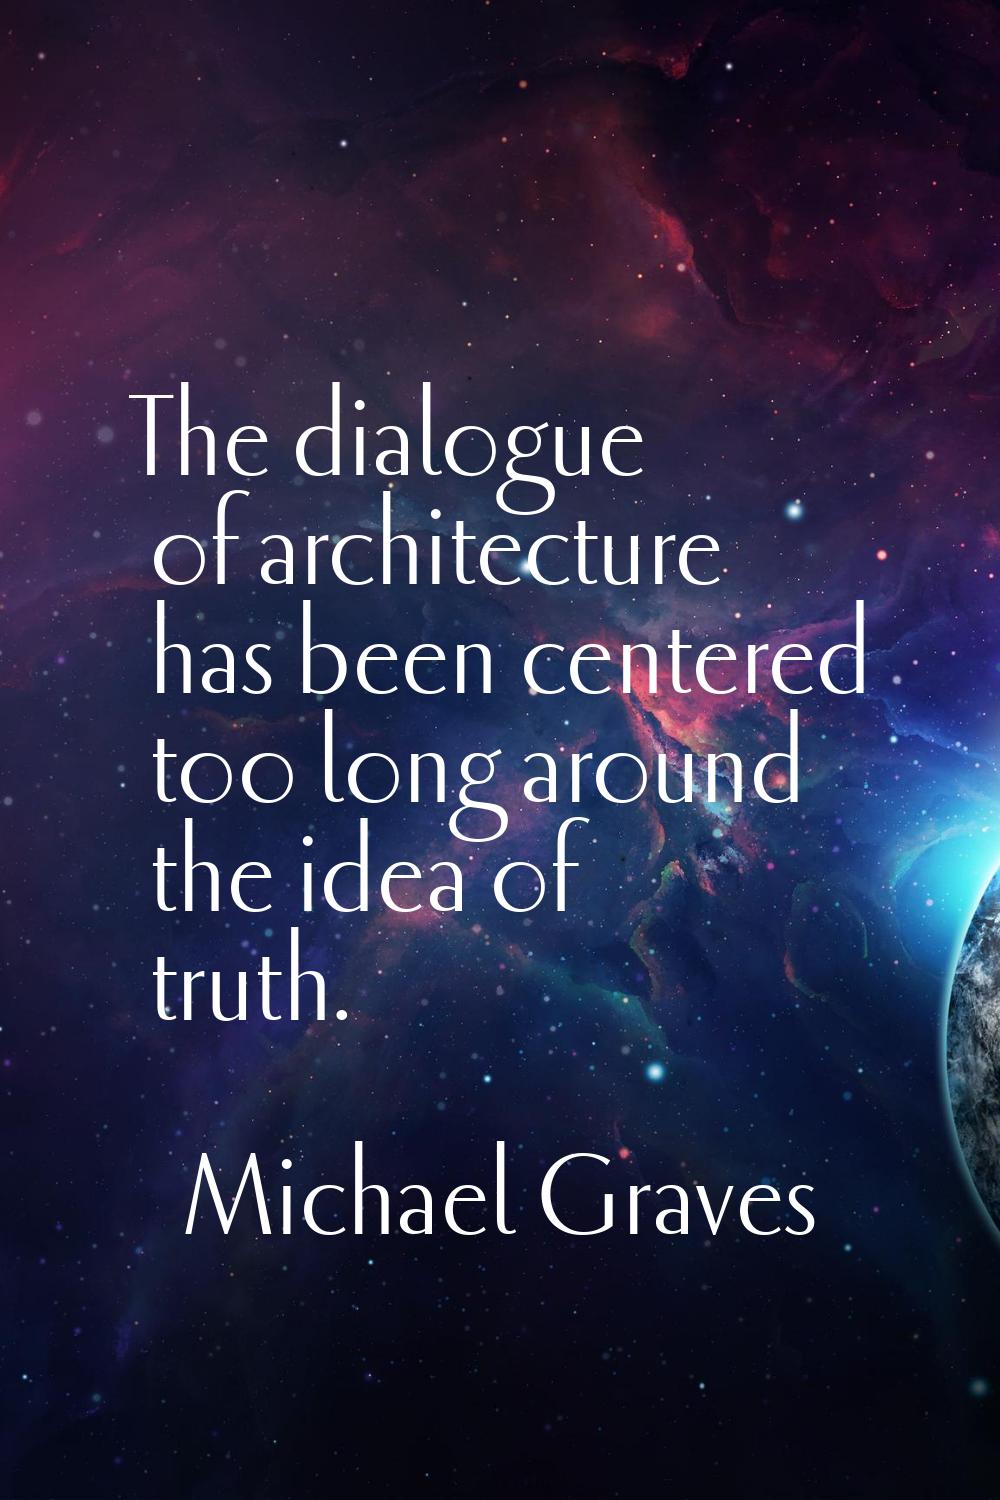 The dialogue of architecture has been centered too long around the idea of truth.